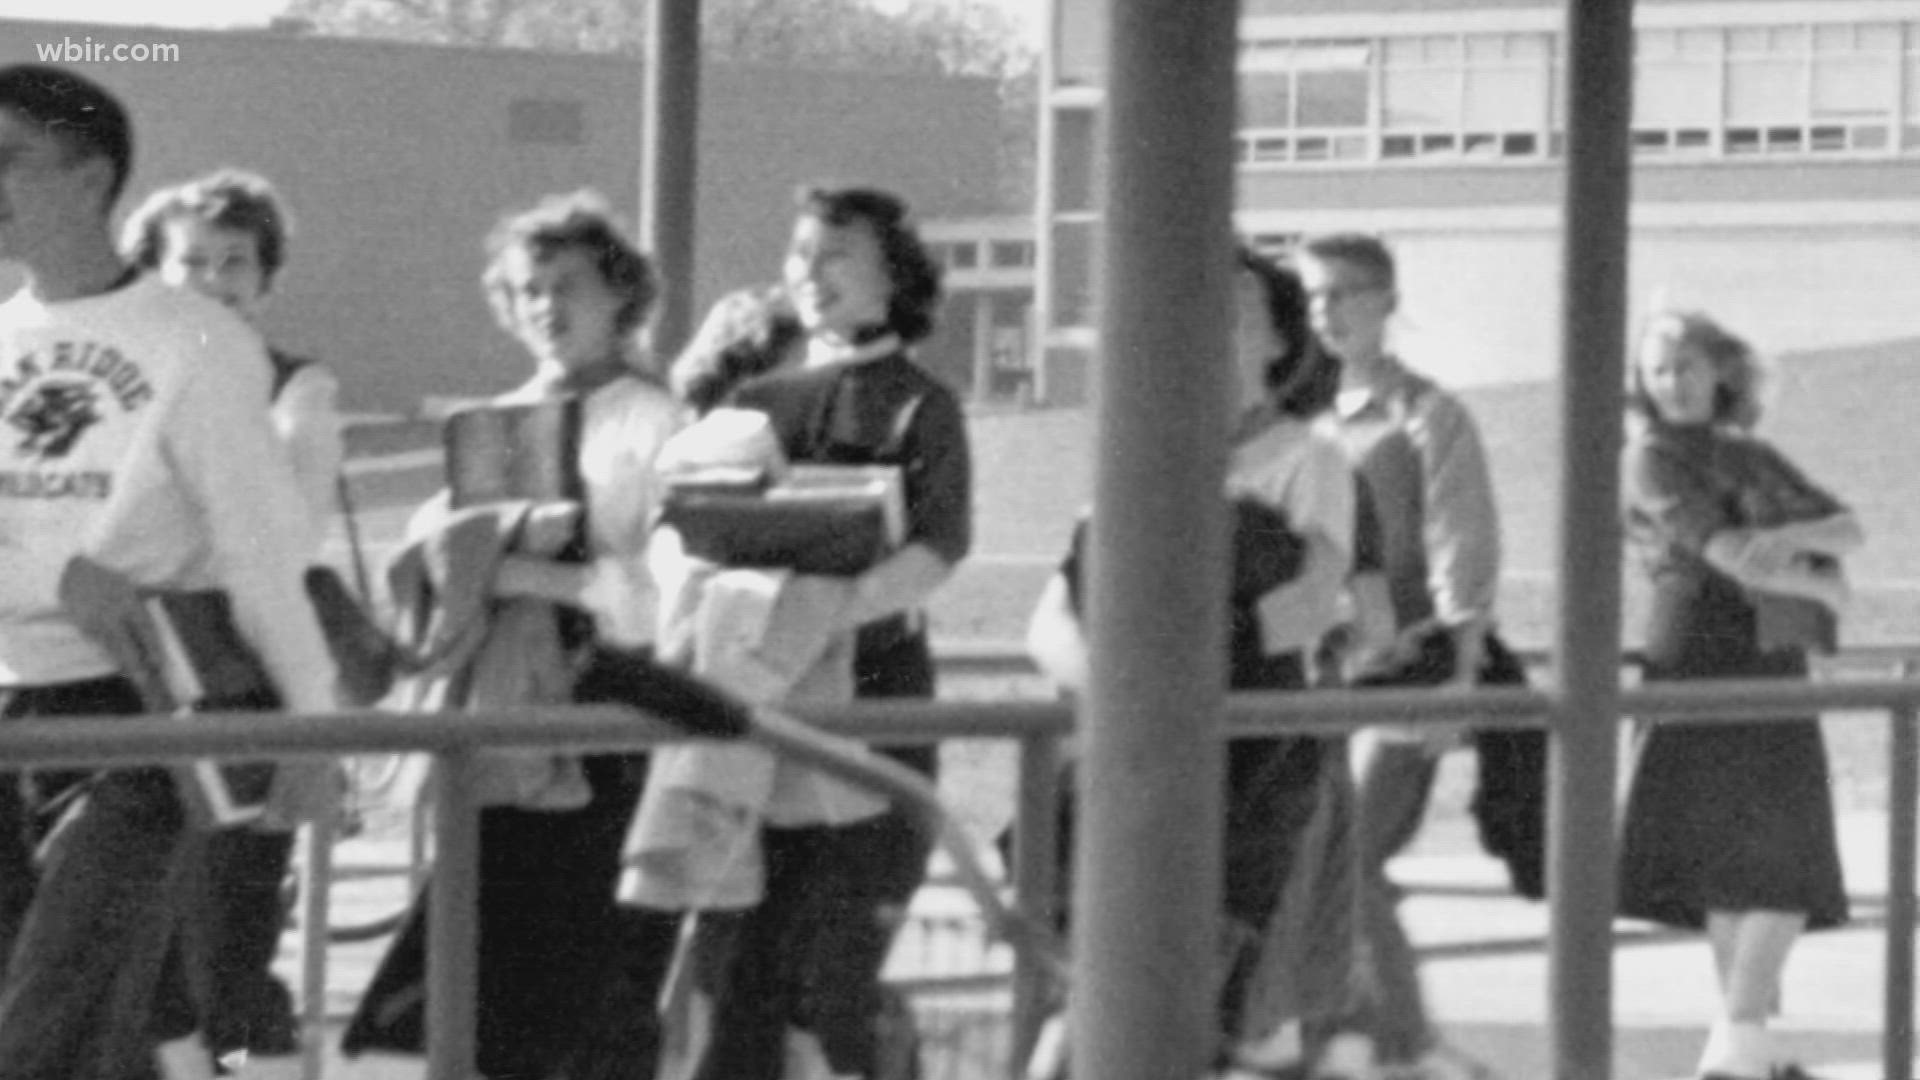 In September 1955, 85 Black students from the Scarboro Community in Oak Ridge became the first to integrate a public school in the southeast.